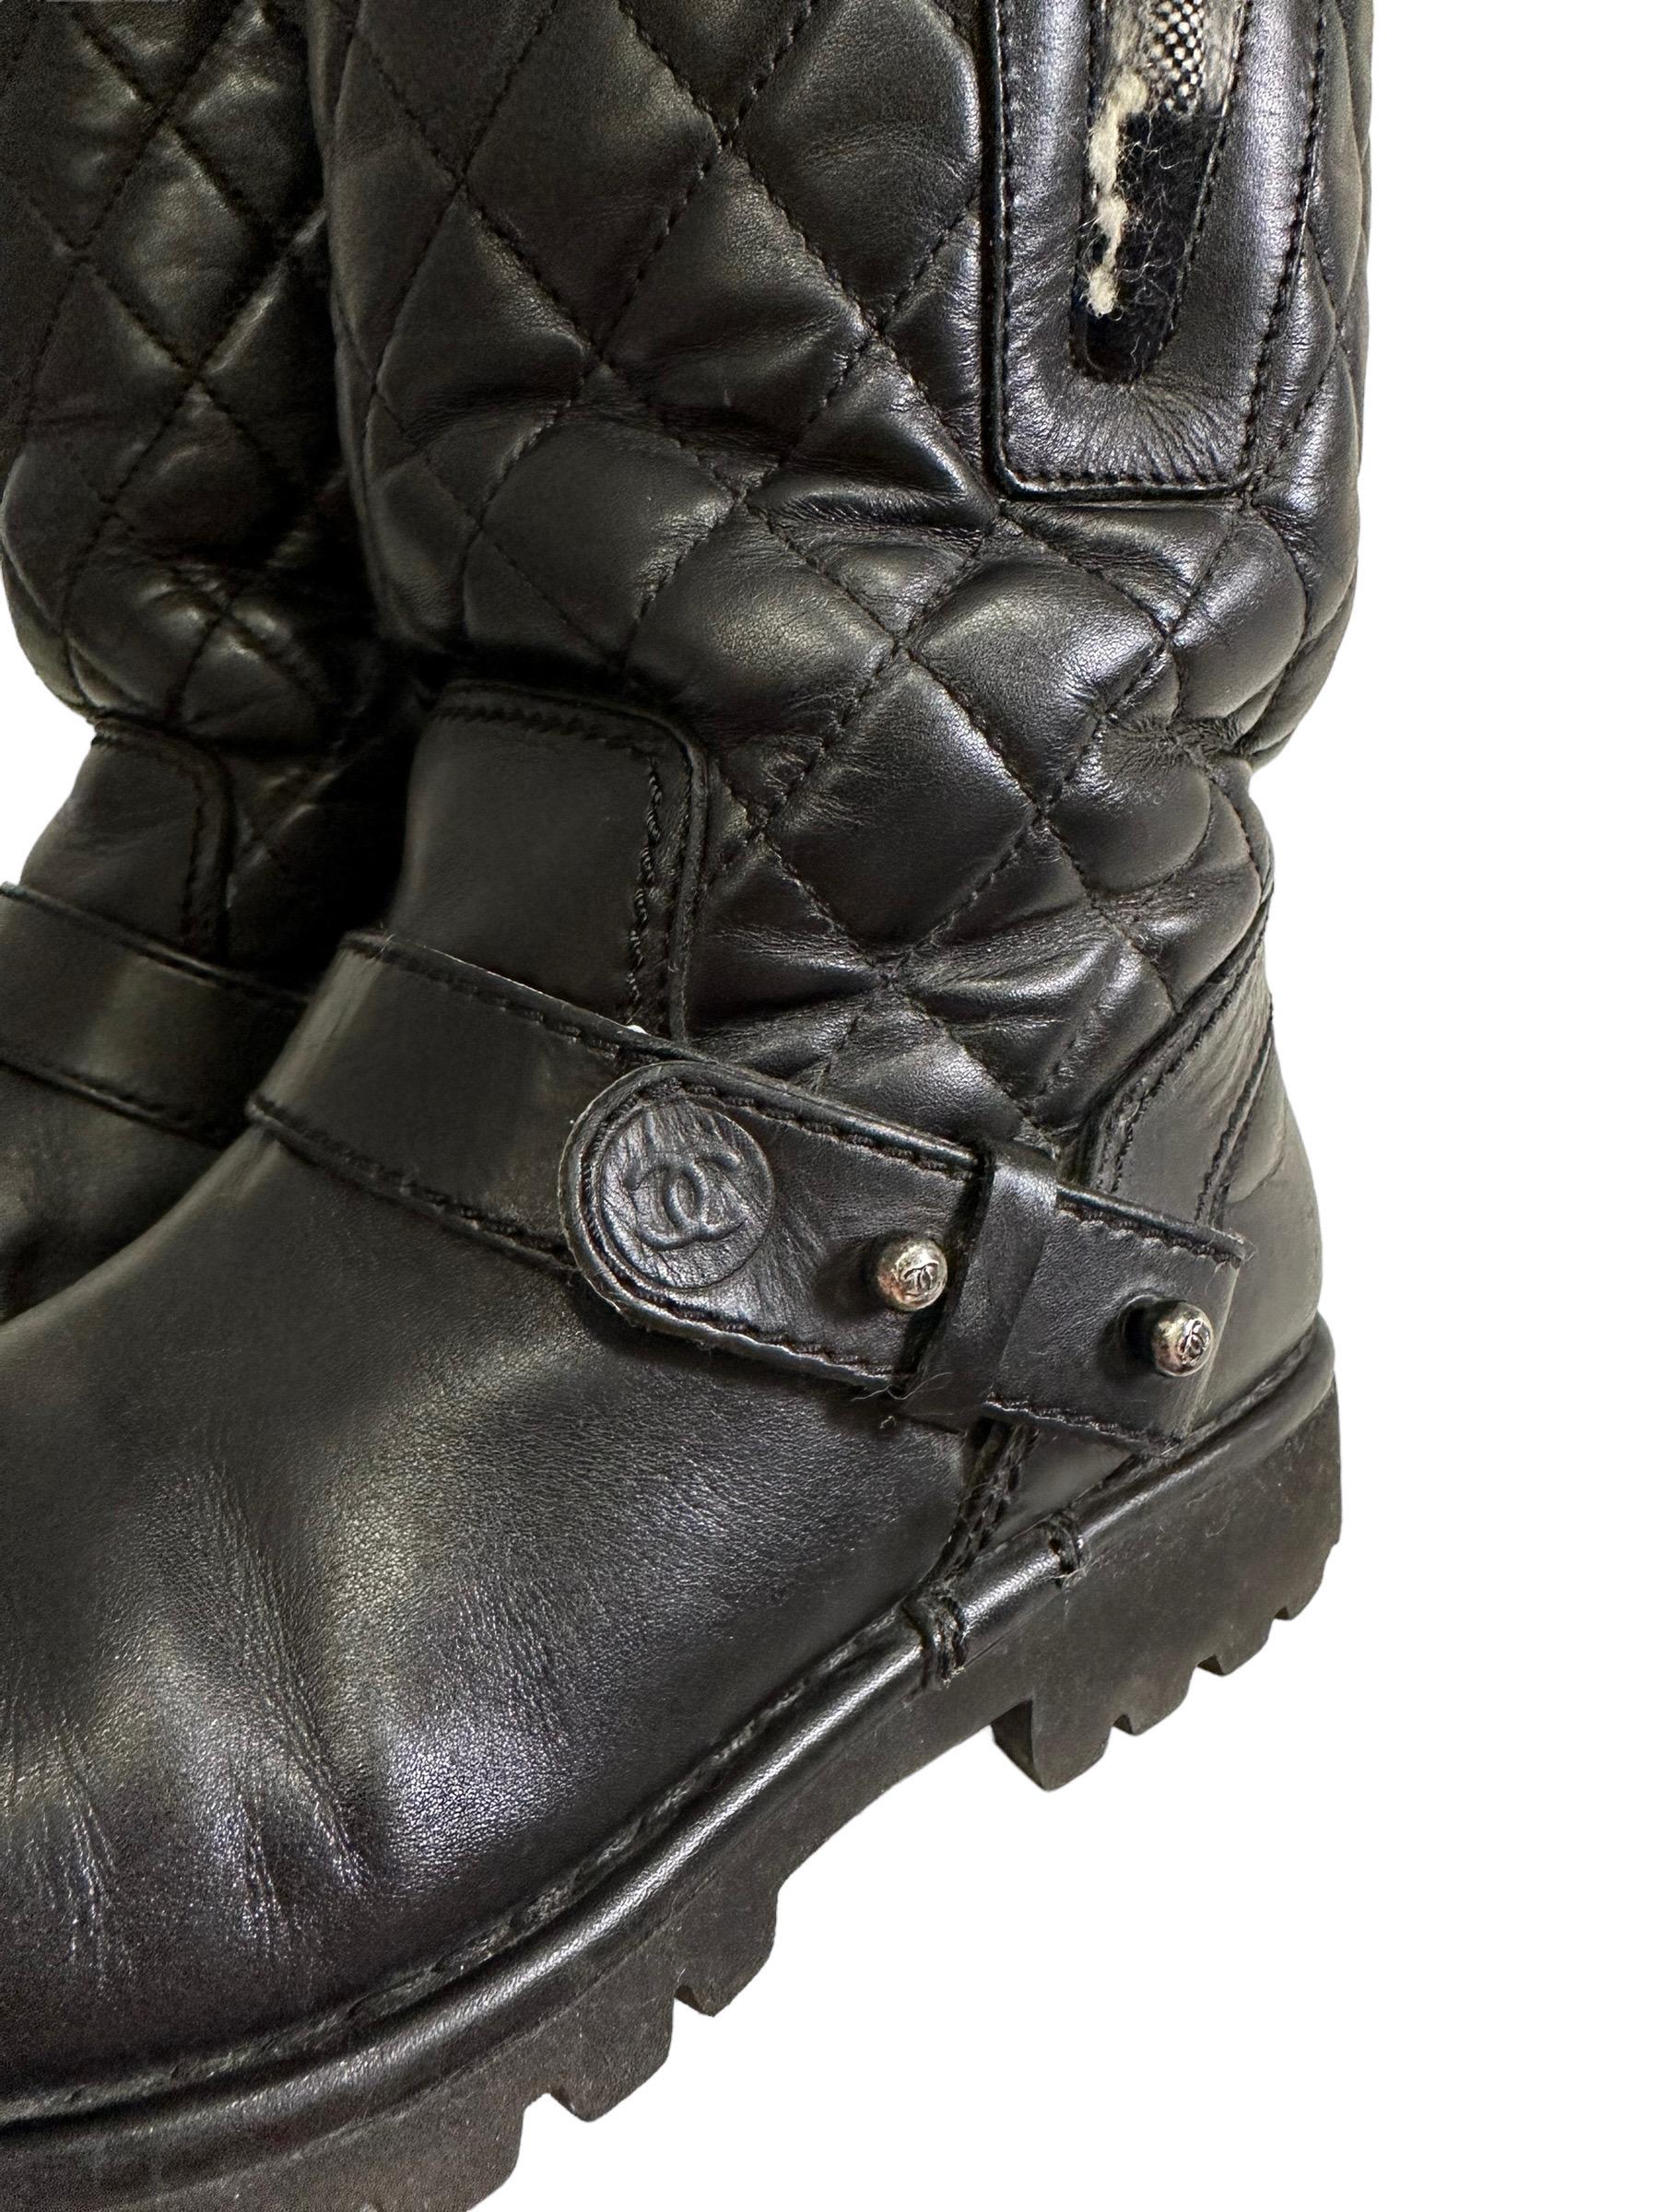 Chanel Biker Boots Black Leather Tweed In Good Condition For Sale In Torre Del Greco, IT